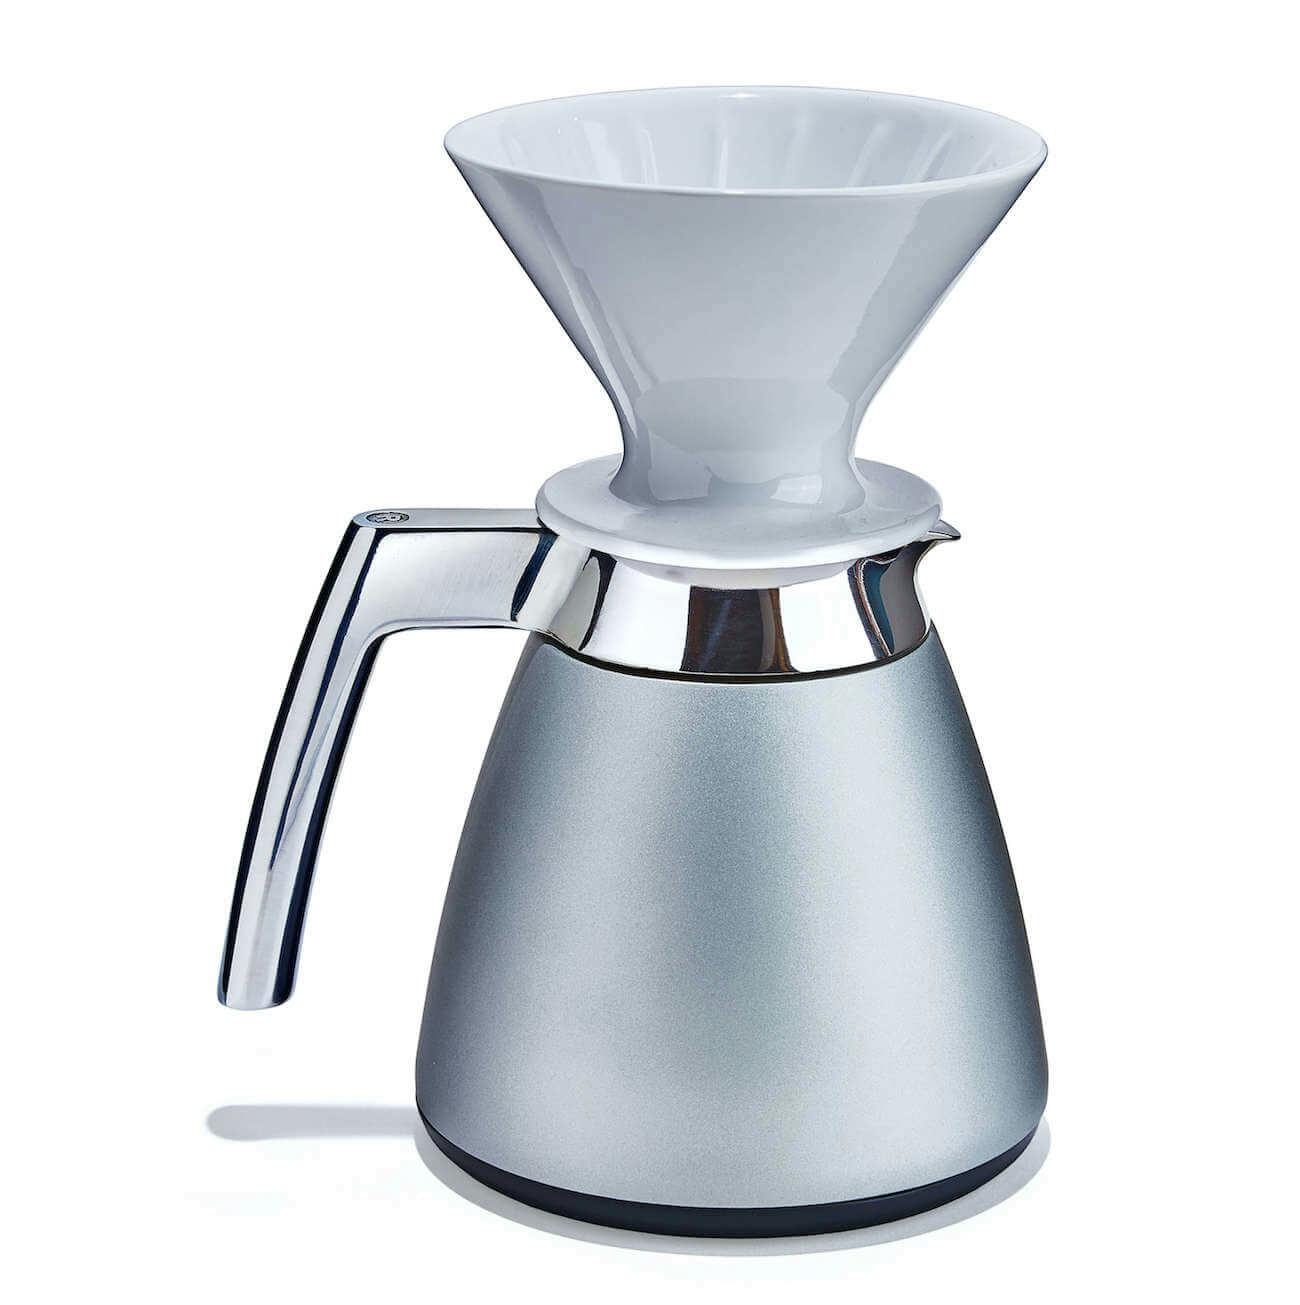 Ratio Eight Thermal Carafe & Dripper - Bright SIlver